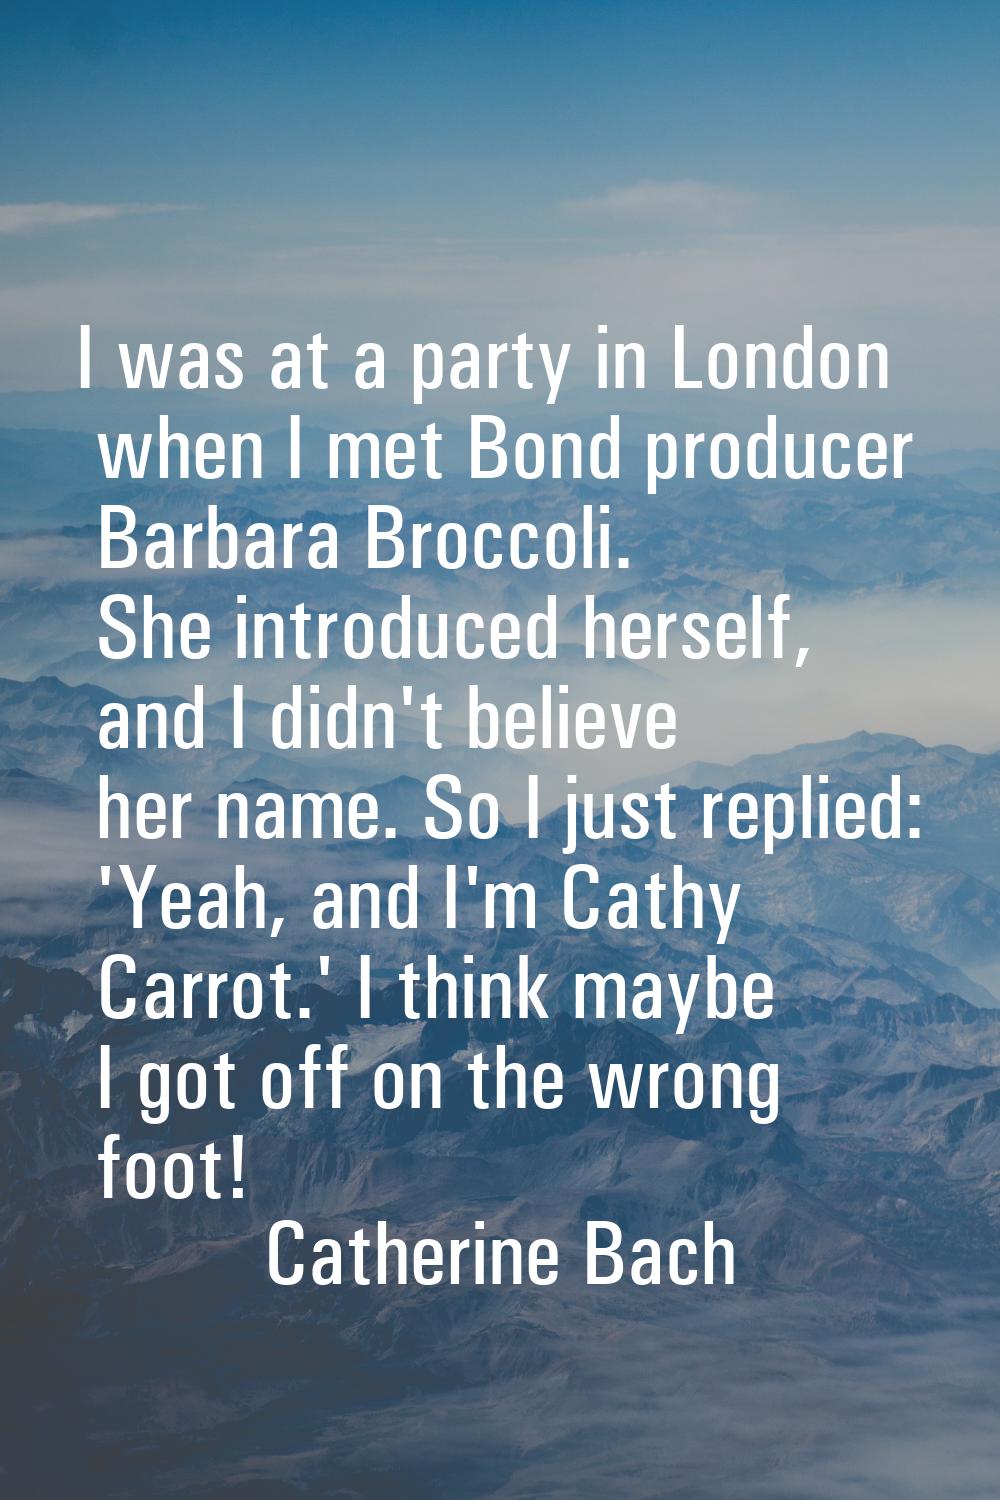 I was at a party in London when I met Bond producer Barbara Broccoli. She introduced herself, and I